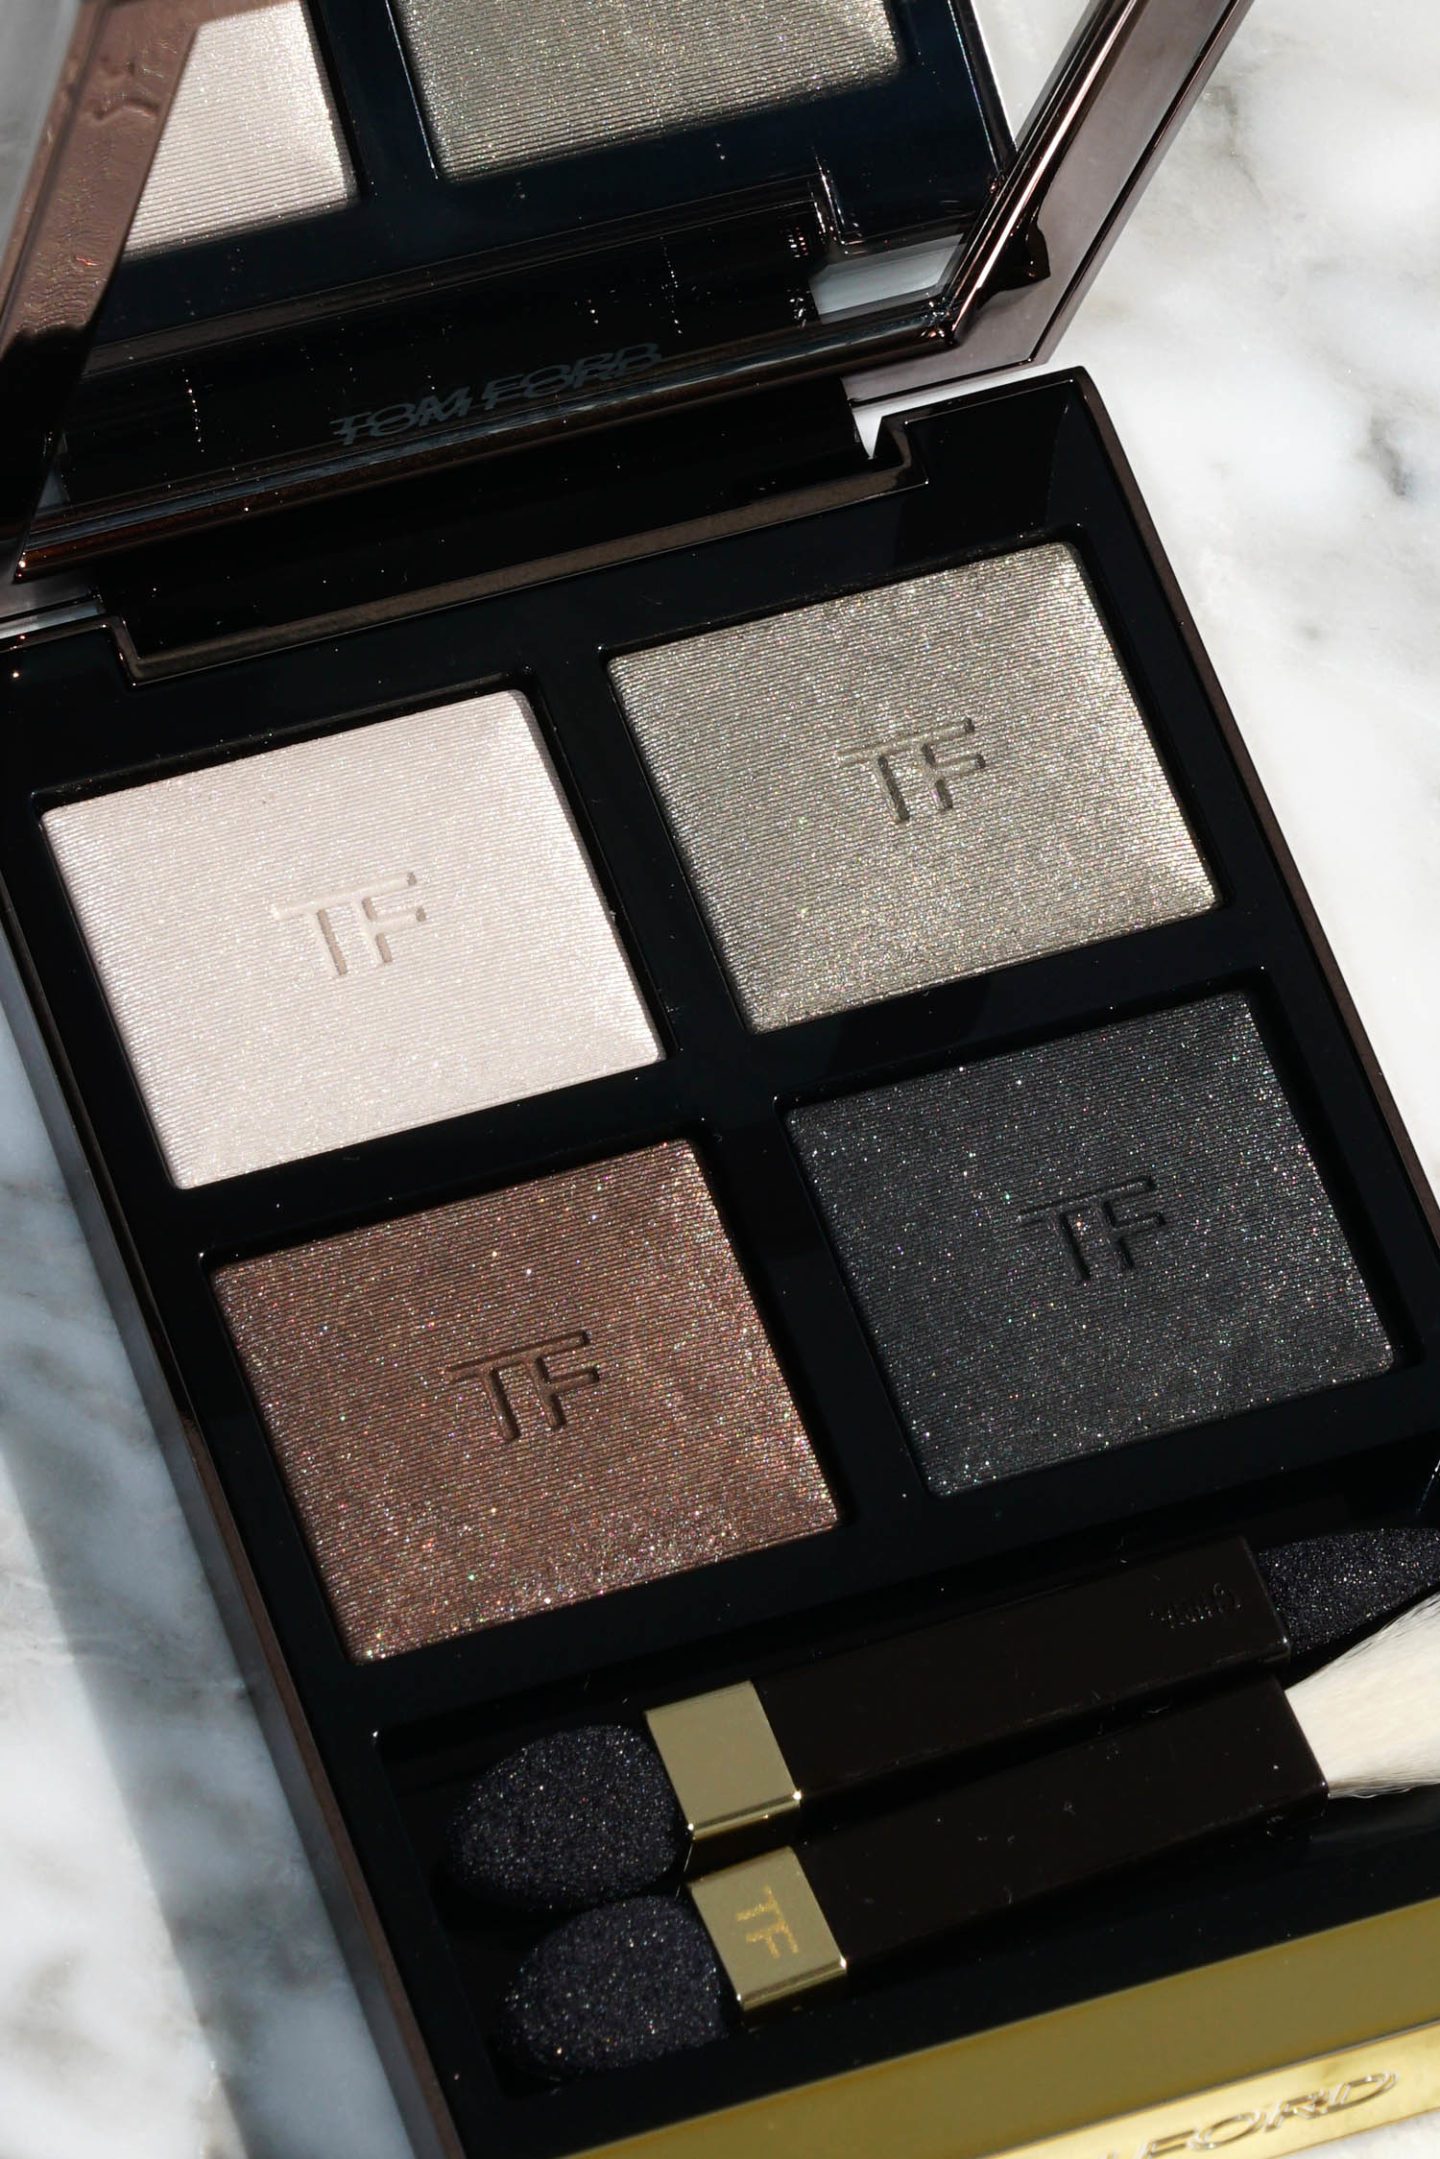 Tom Ford Eye Color Quad Double Indemnity Review | The Beauty Look Book